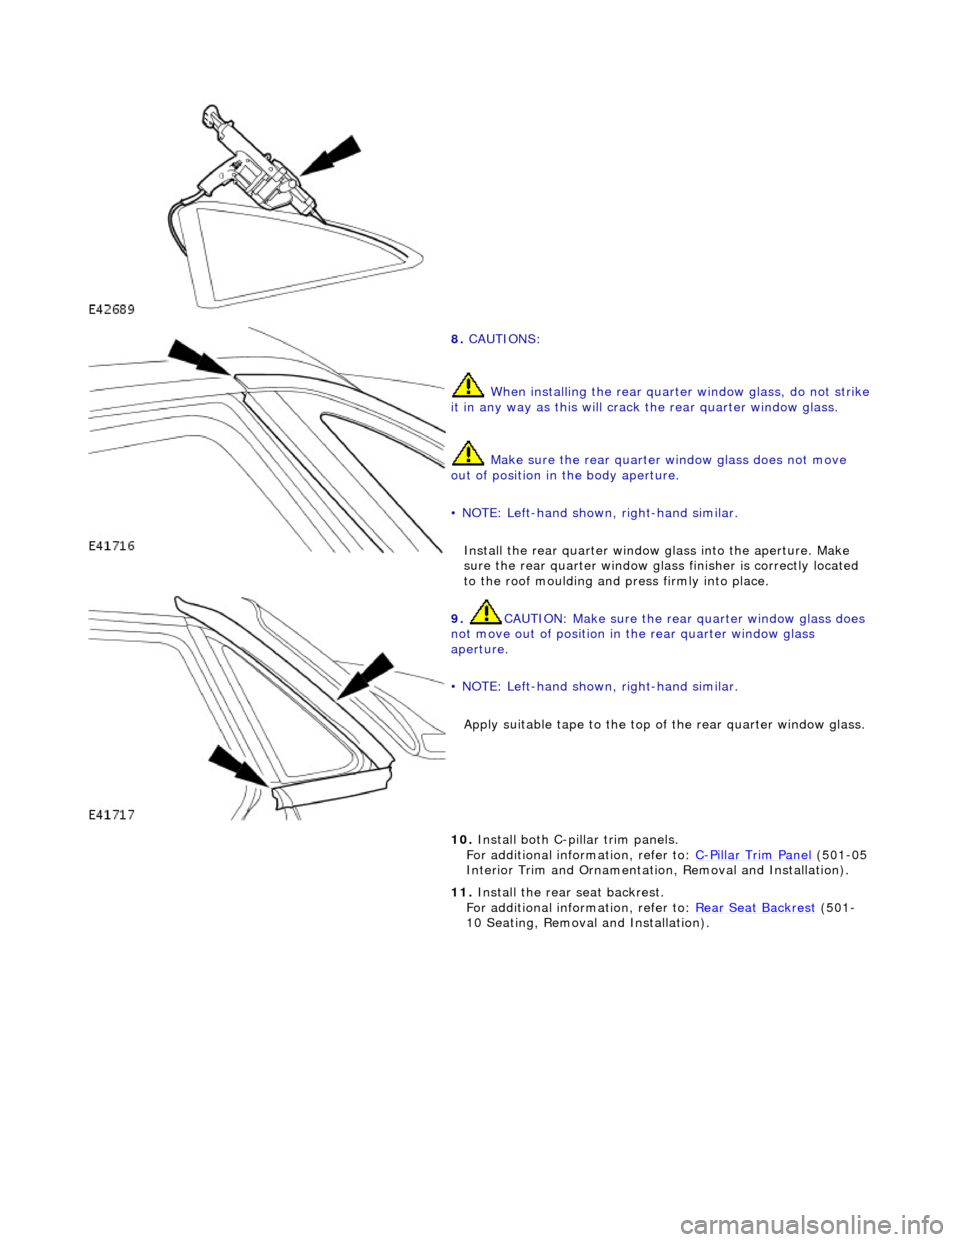 JAGUAR X308 1998 2.G Workshop Manual  
 
 
 
8. CAUTIONS: 
 When installing the rear quarte r window glass, do not strike it in any way as this will crack the rear quarter window glass. 
 Make sure the rear  quarter window glass does not